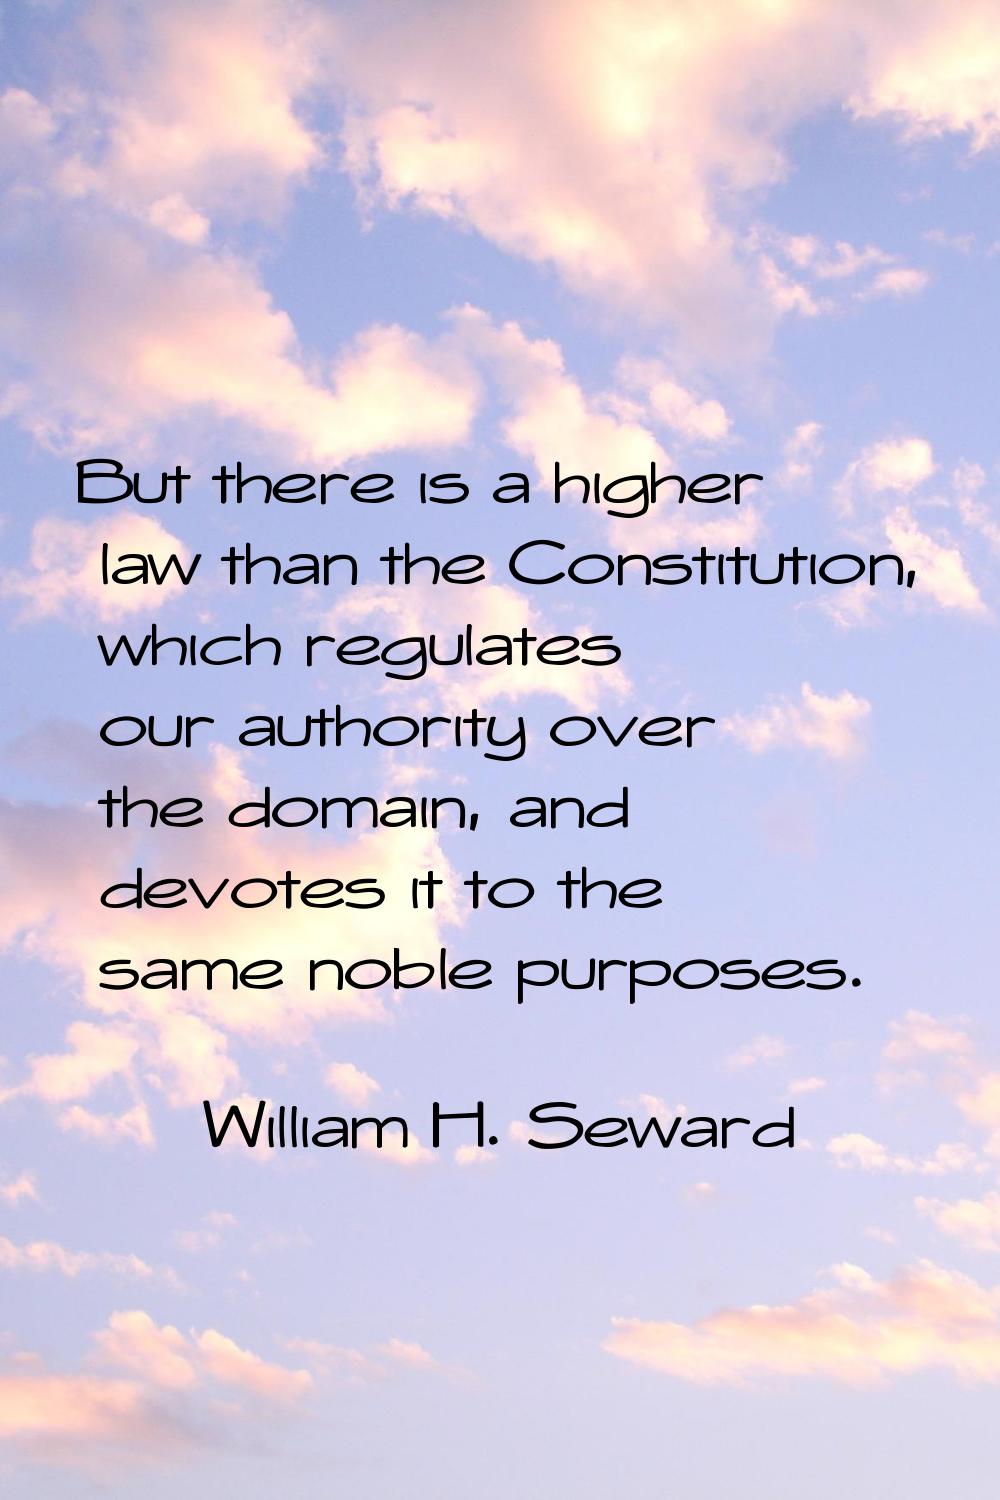 But there is a higher law than the Constitution, which regulates our authority over the domain, and